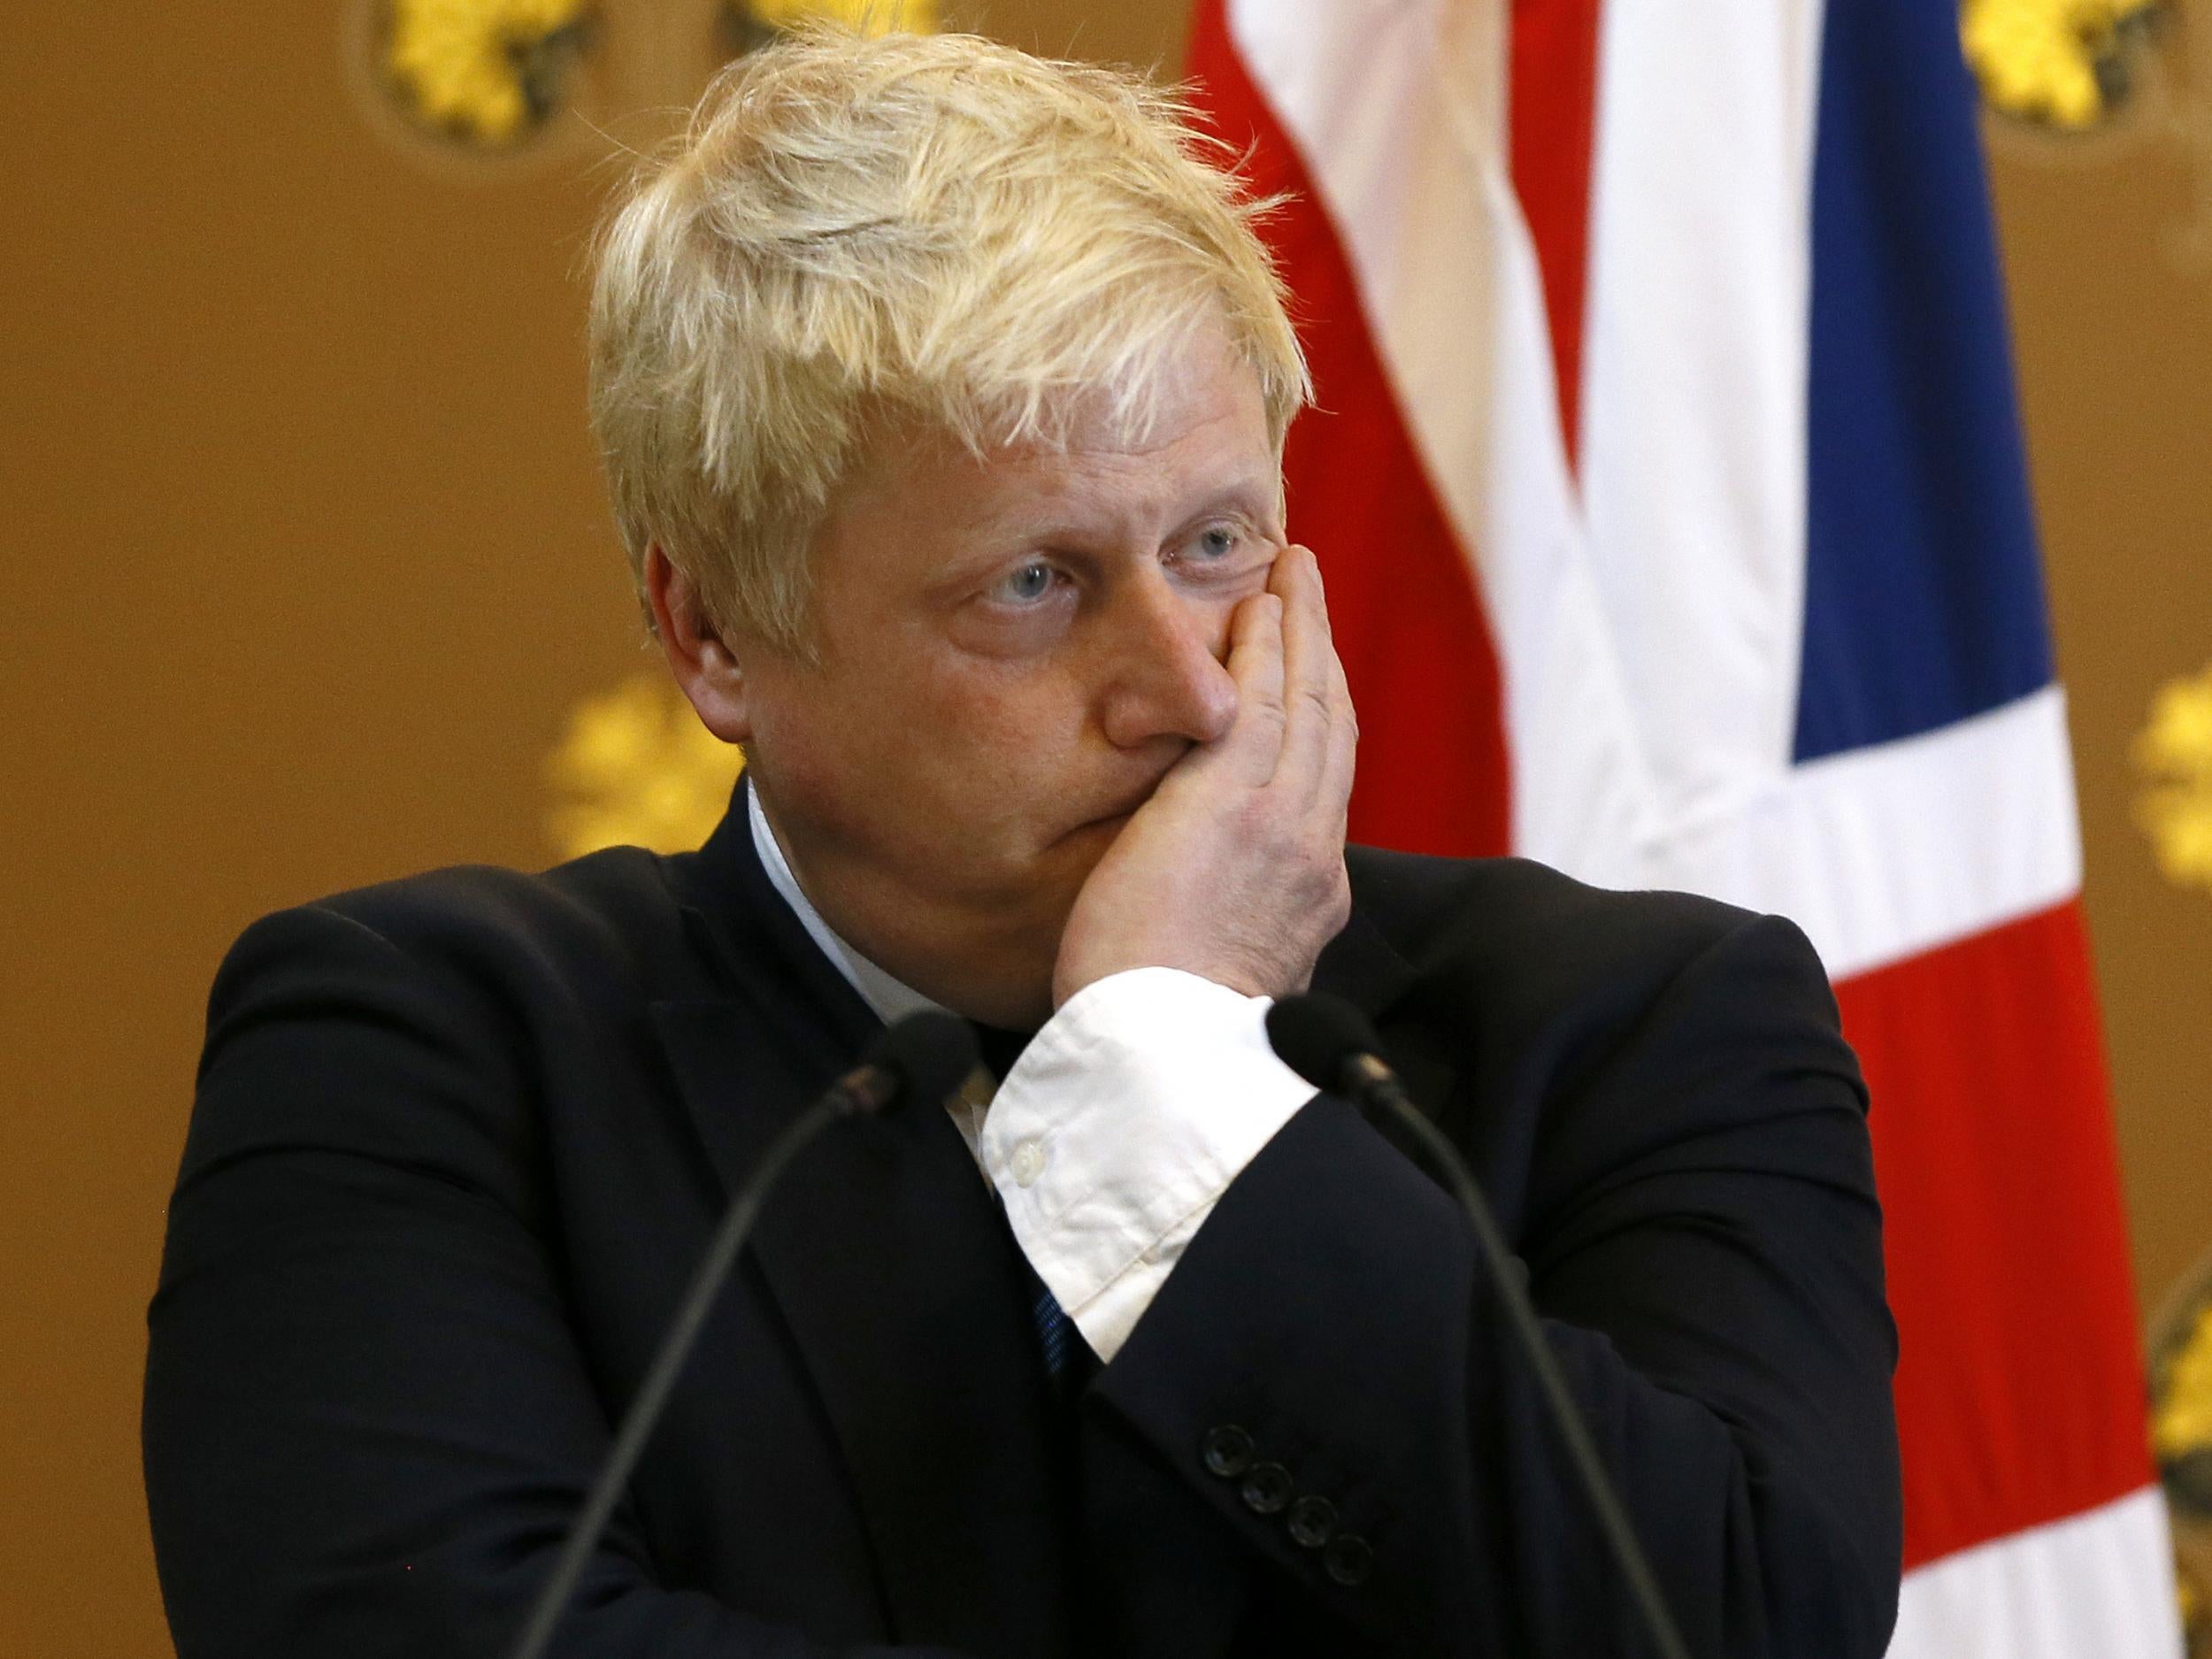 Johnson met with the Friends of Syria in London on Wednesday